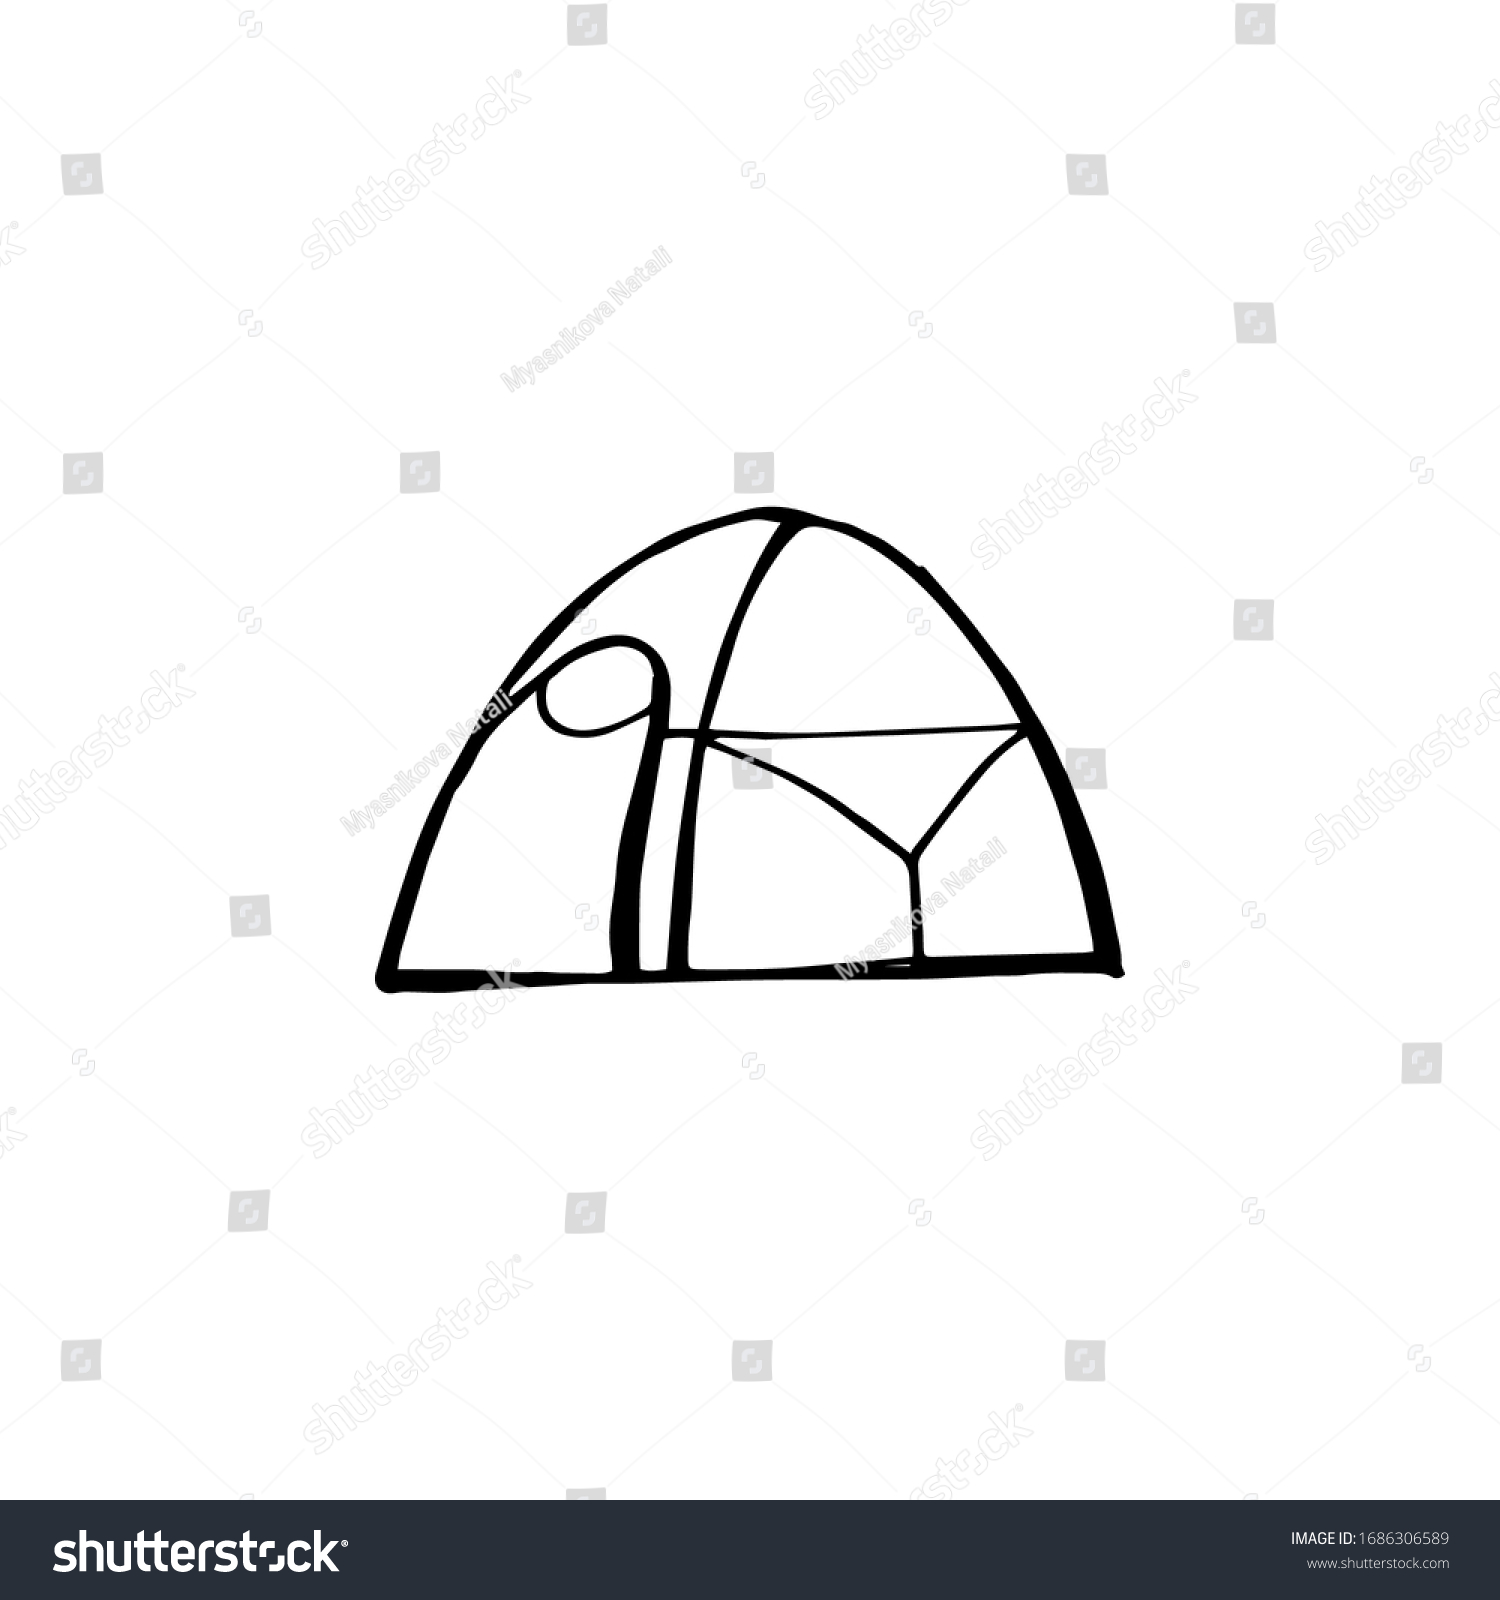 SVG of Camping tent. Hand drawing sketch vector illustration isolated on white background svg